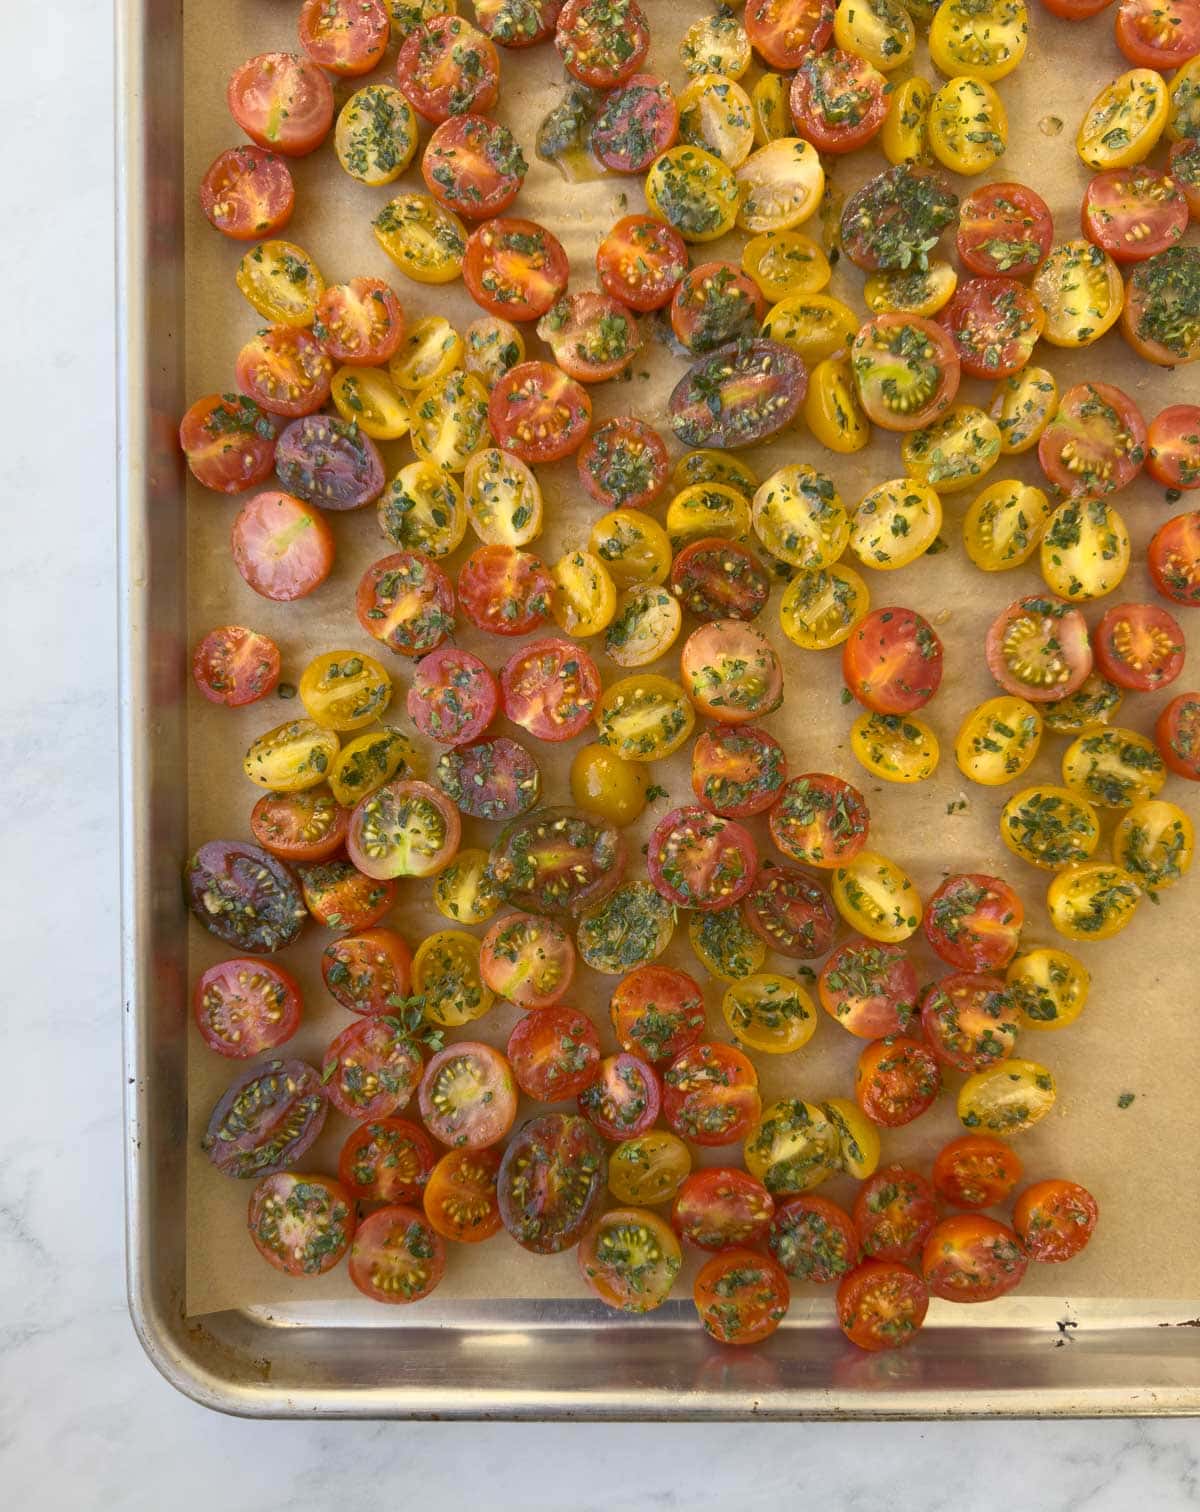 A baking tray of fresh cherry tomatoes ready for the oven.